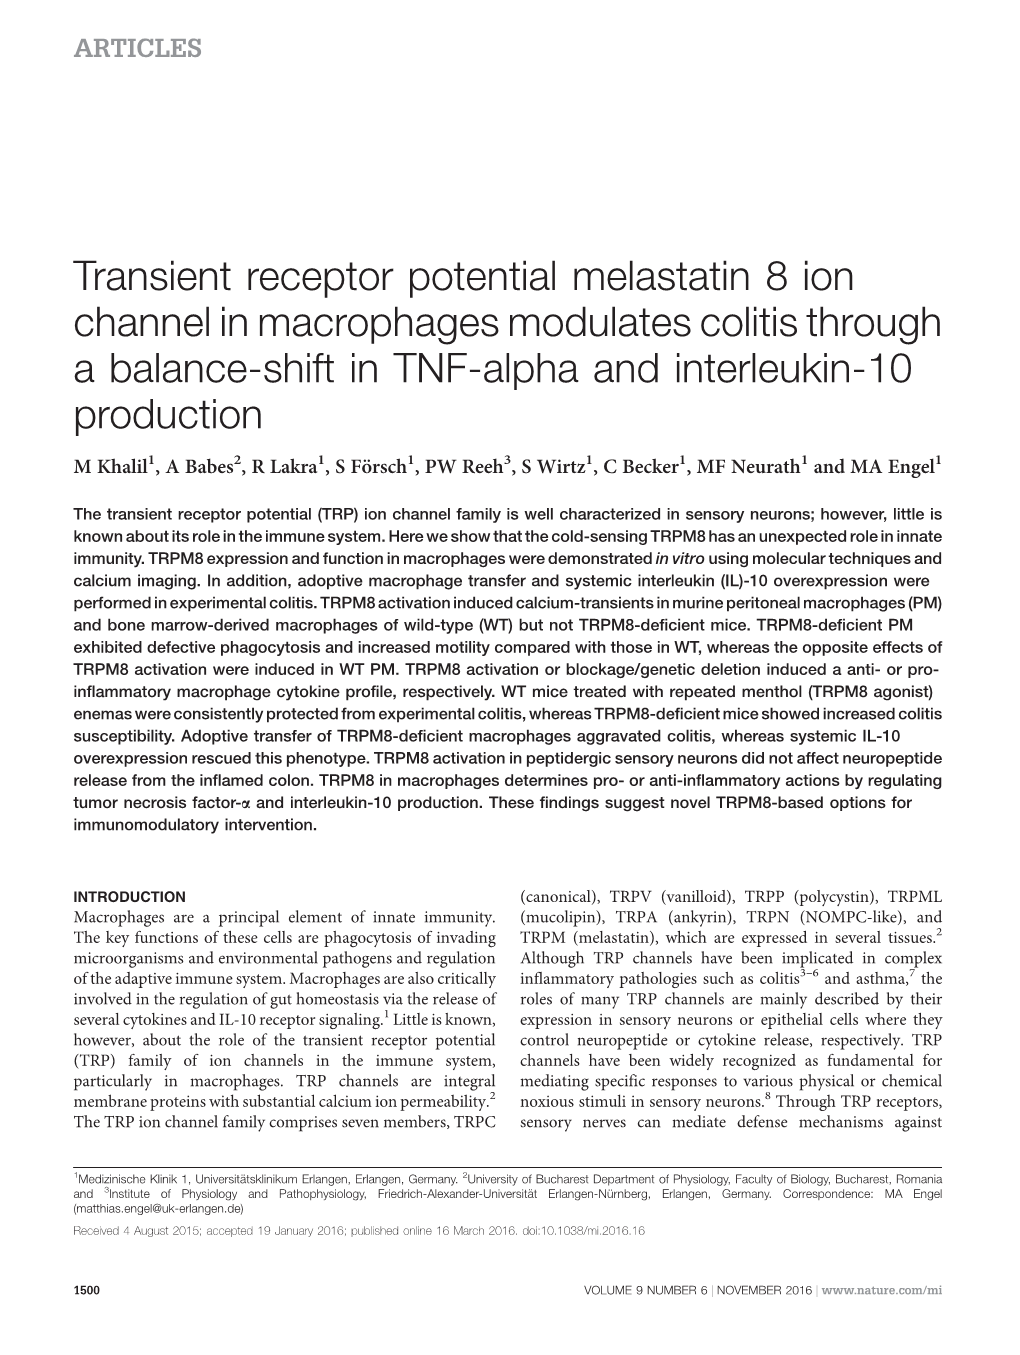 Transient Receptor Potential Melastatin 8 Ion Channel in Macrophages Modulates Colitis Through a Balance-Shift in TNF-Alpha and Interleukin-10 Production